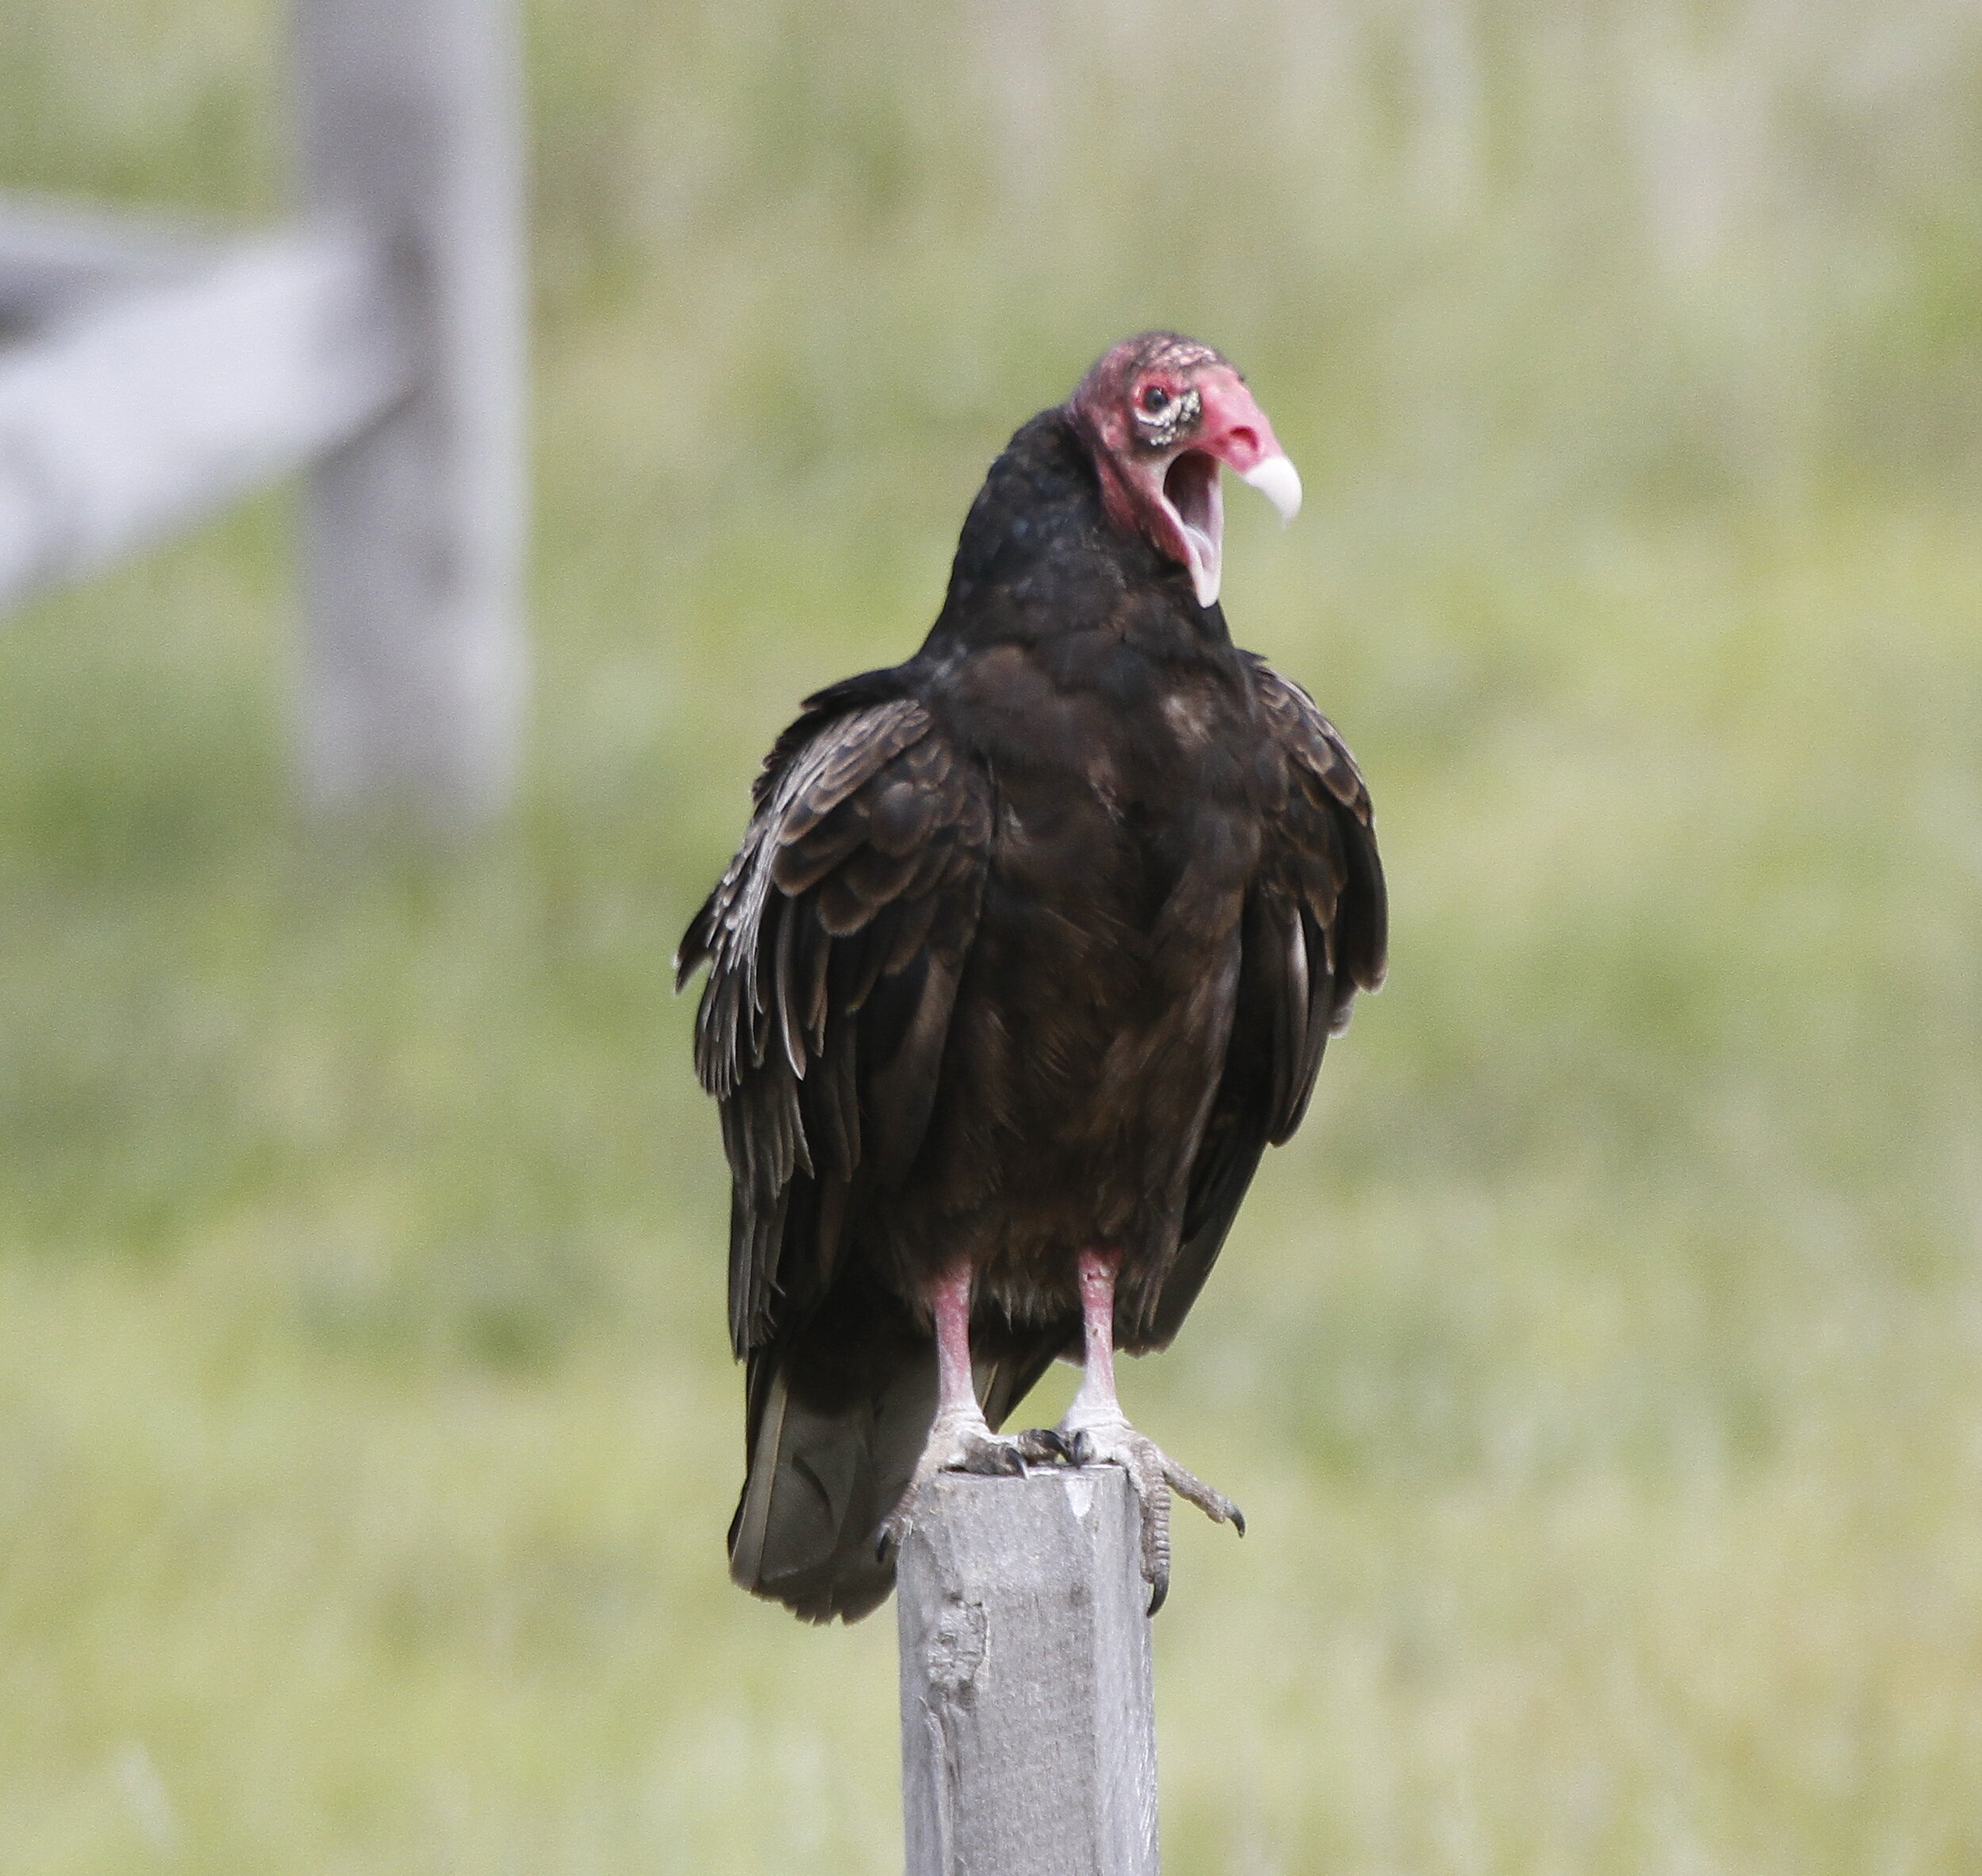 Turkey vultures returning from annual migration - Niagara-on-the